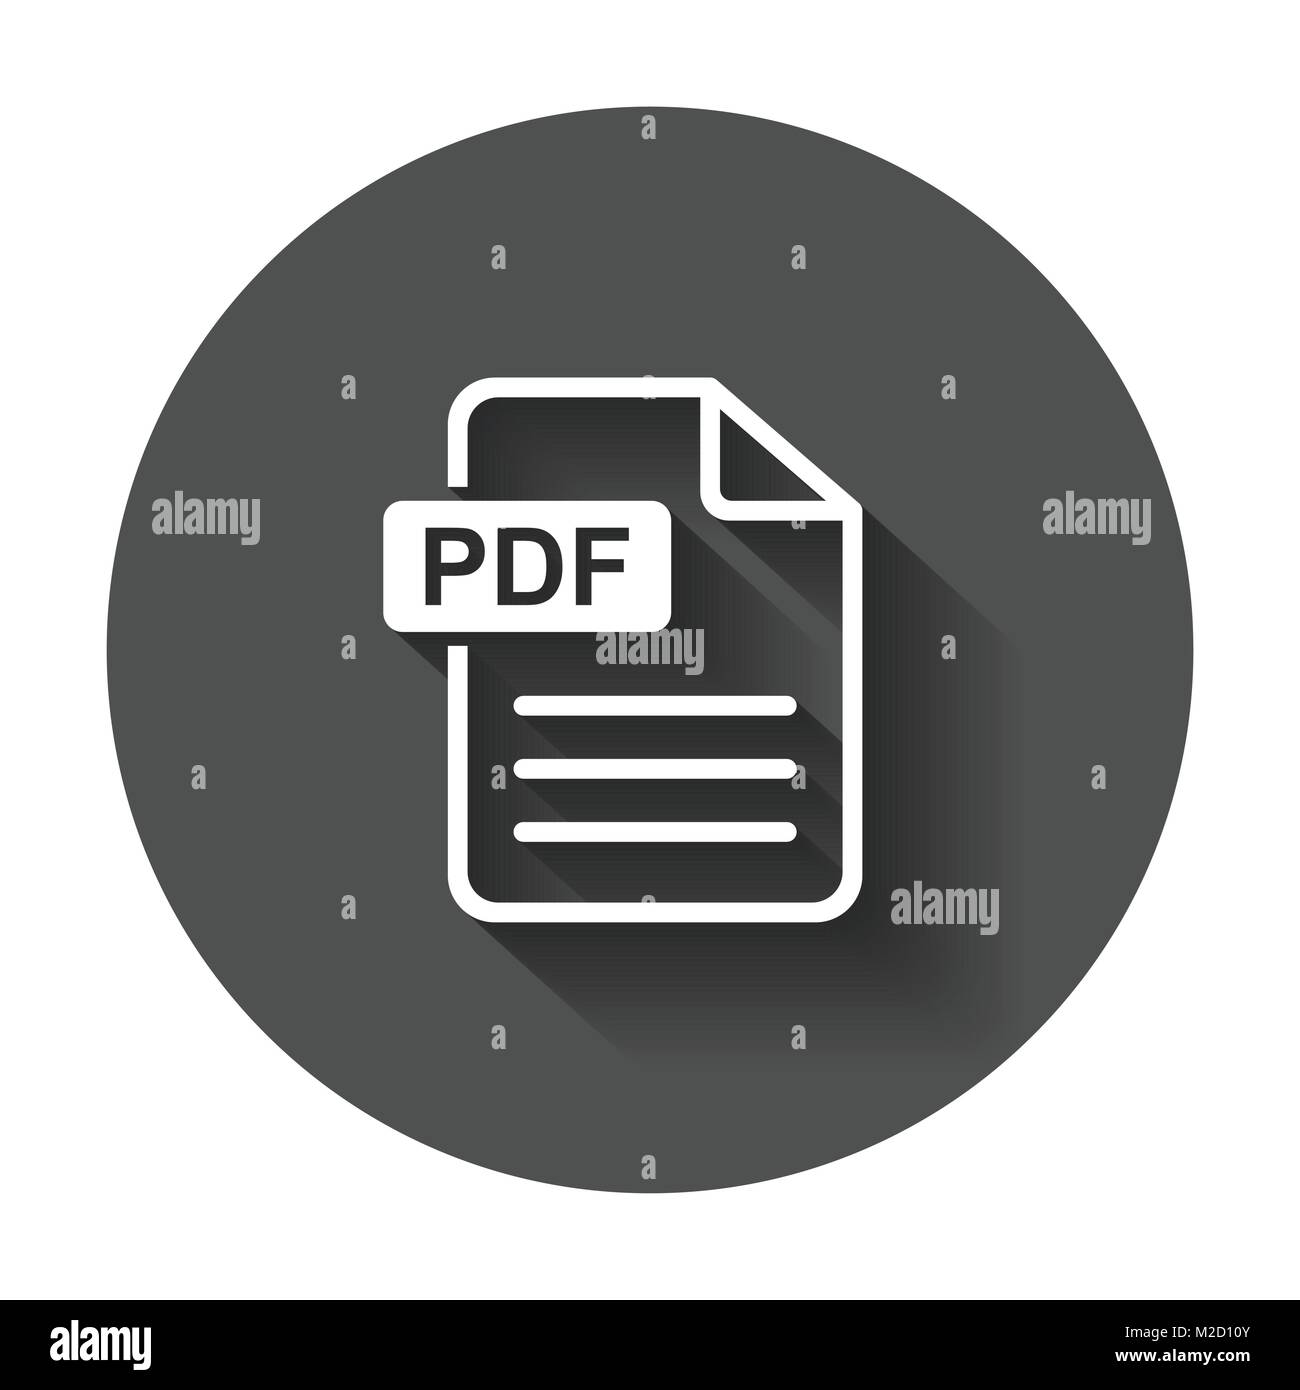 PDF download vector icon. Simple flat pictogram for business, marketing, internet concept. Vector illustration with long shadow. Stock Vector